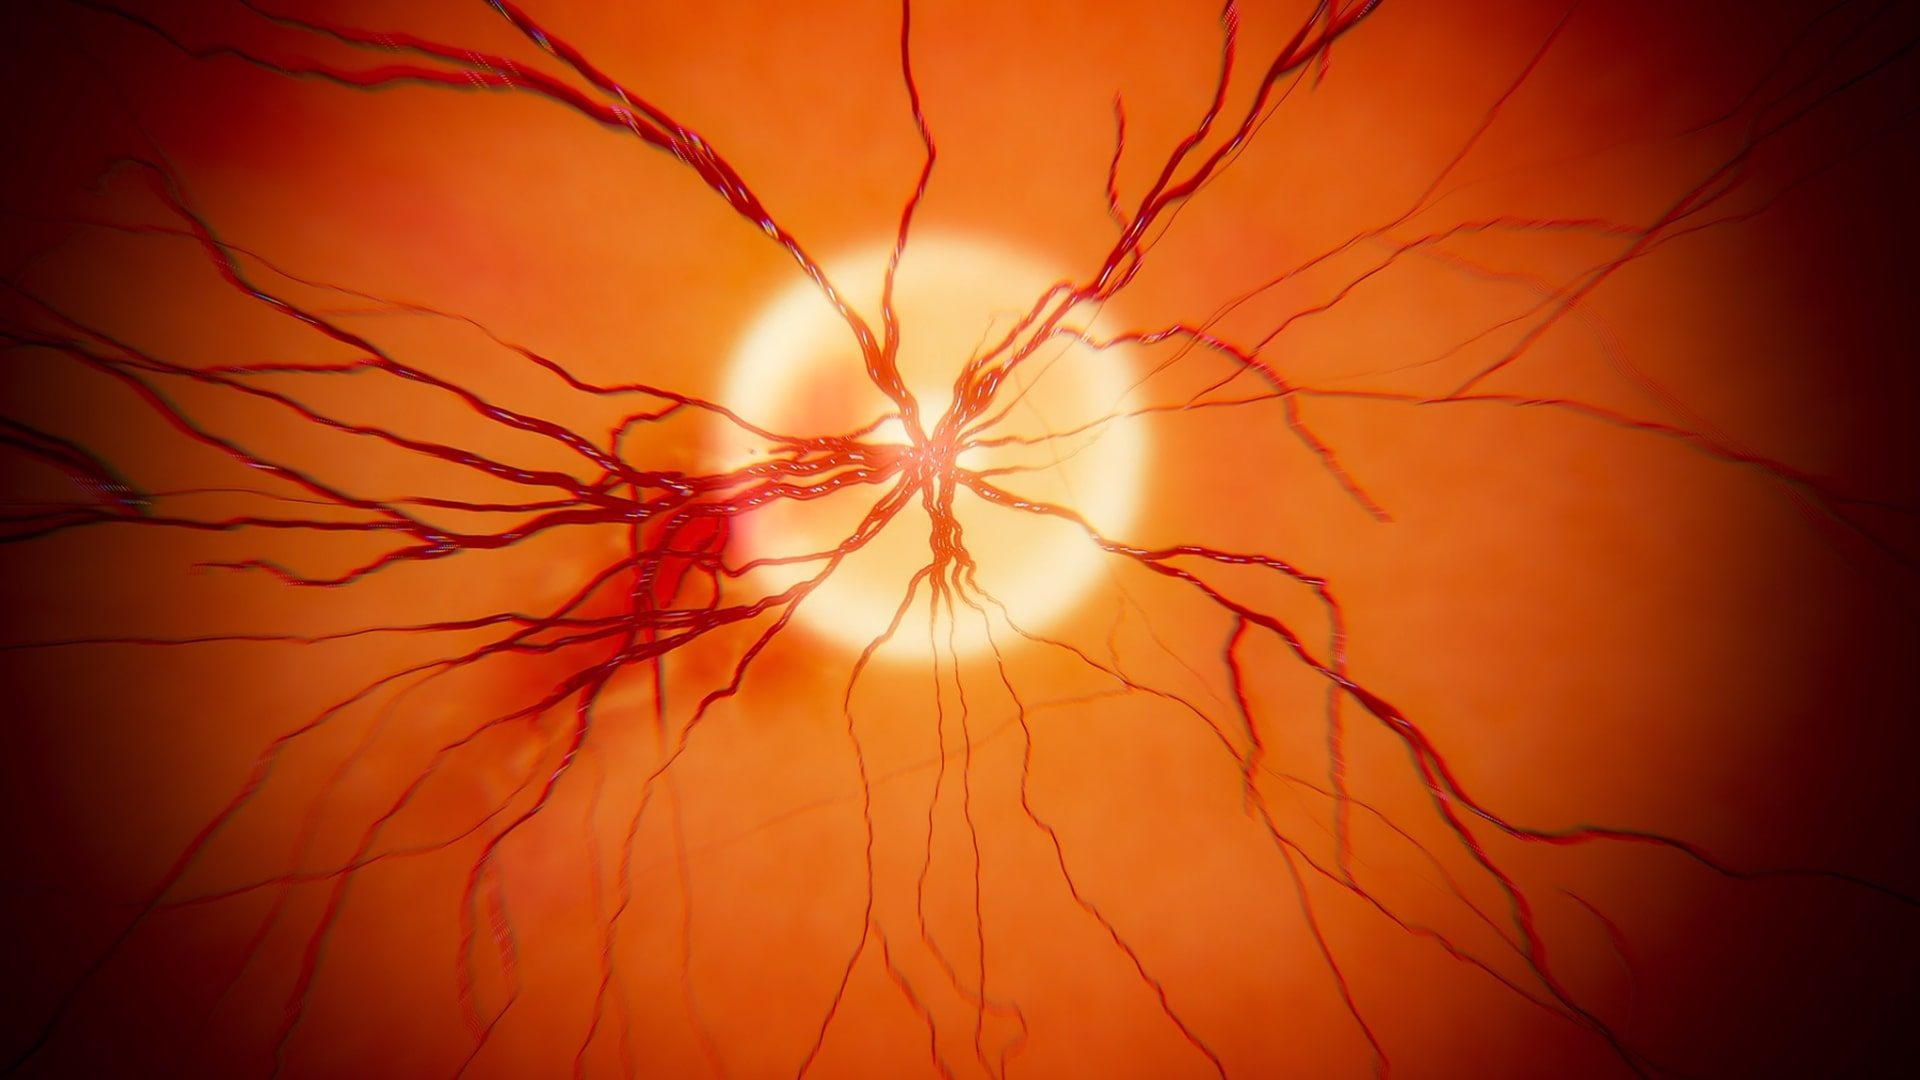 This image shows a 3D animation of the retina of a human eye